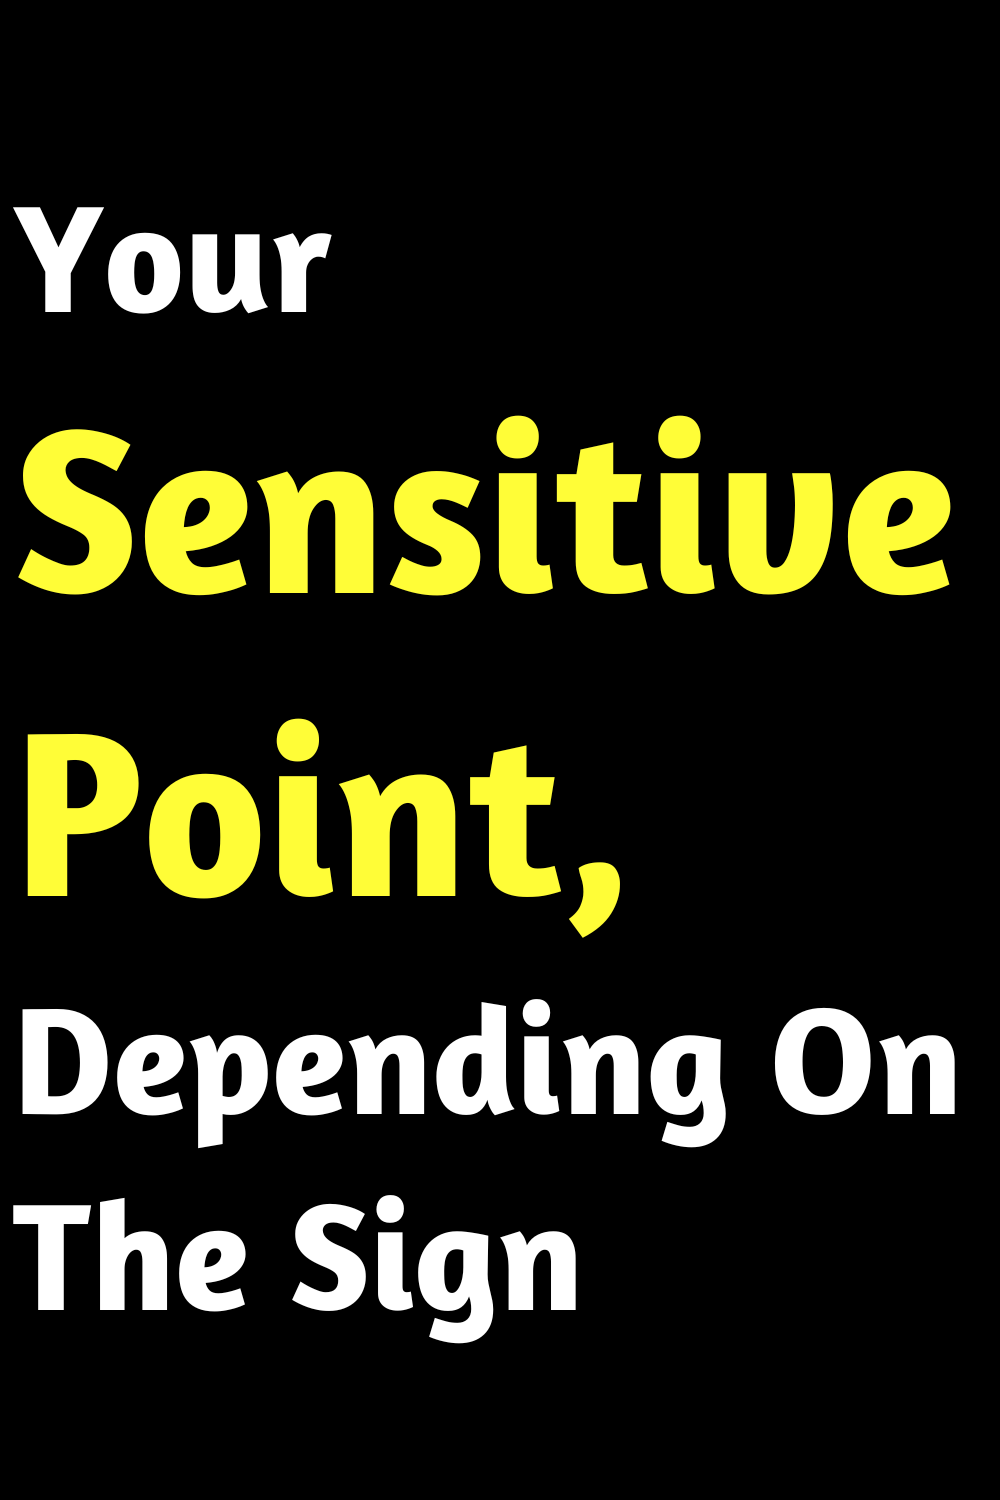 Your Sensitive Point, Depending On The Sign